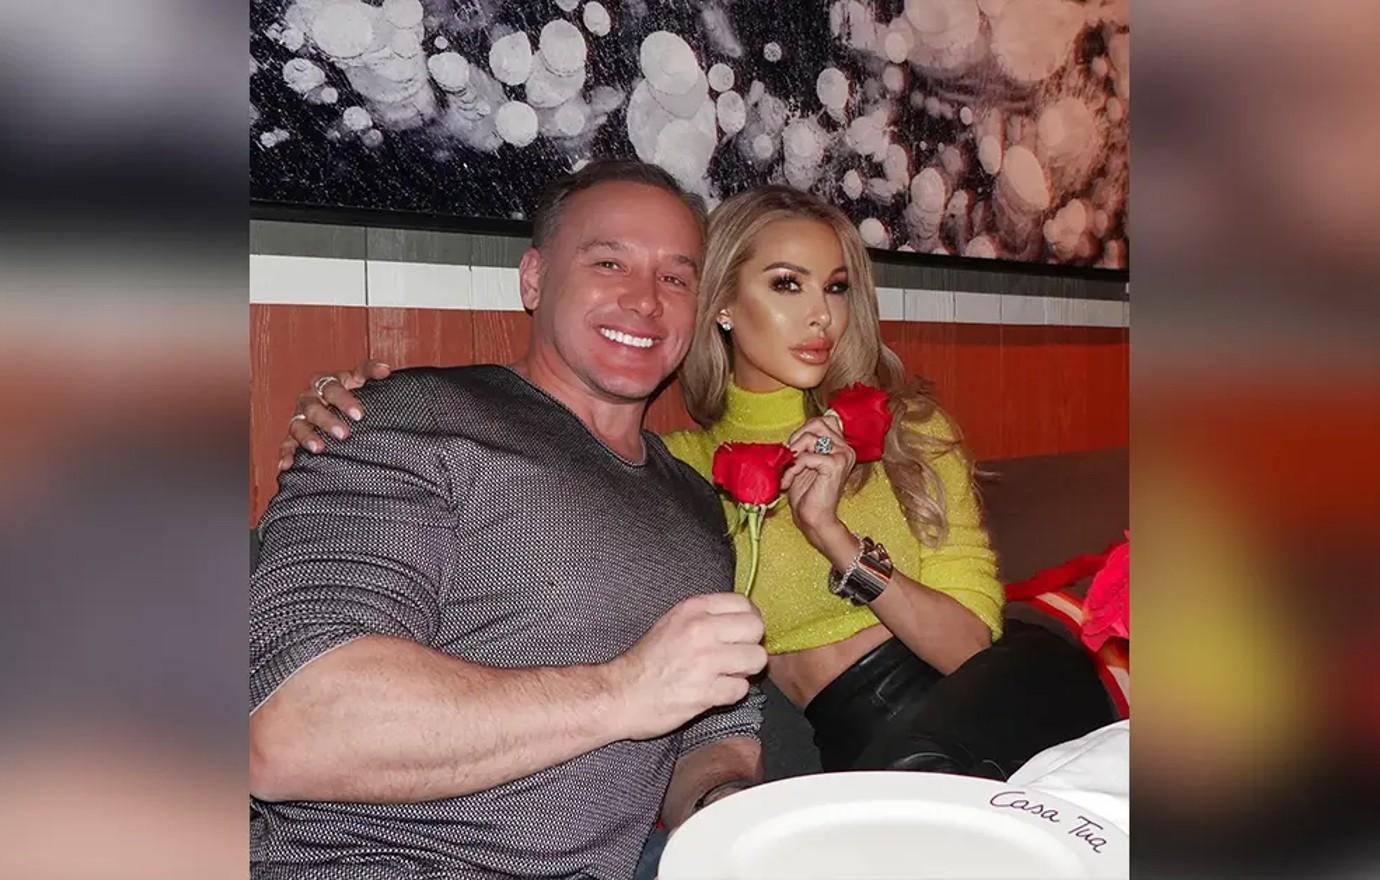 Lisa Hochsteins Ex Lenny Claims She Planted Listening Device on His